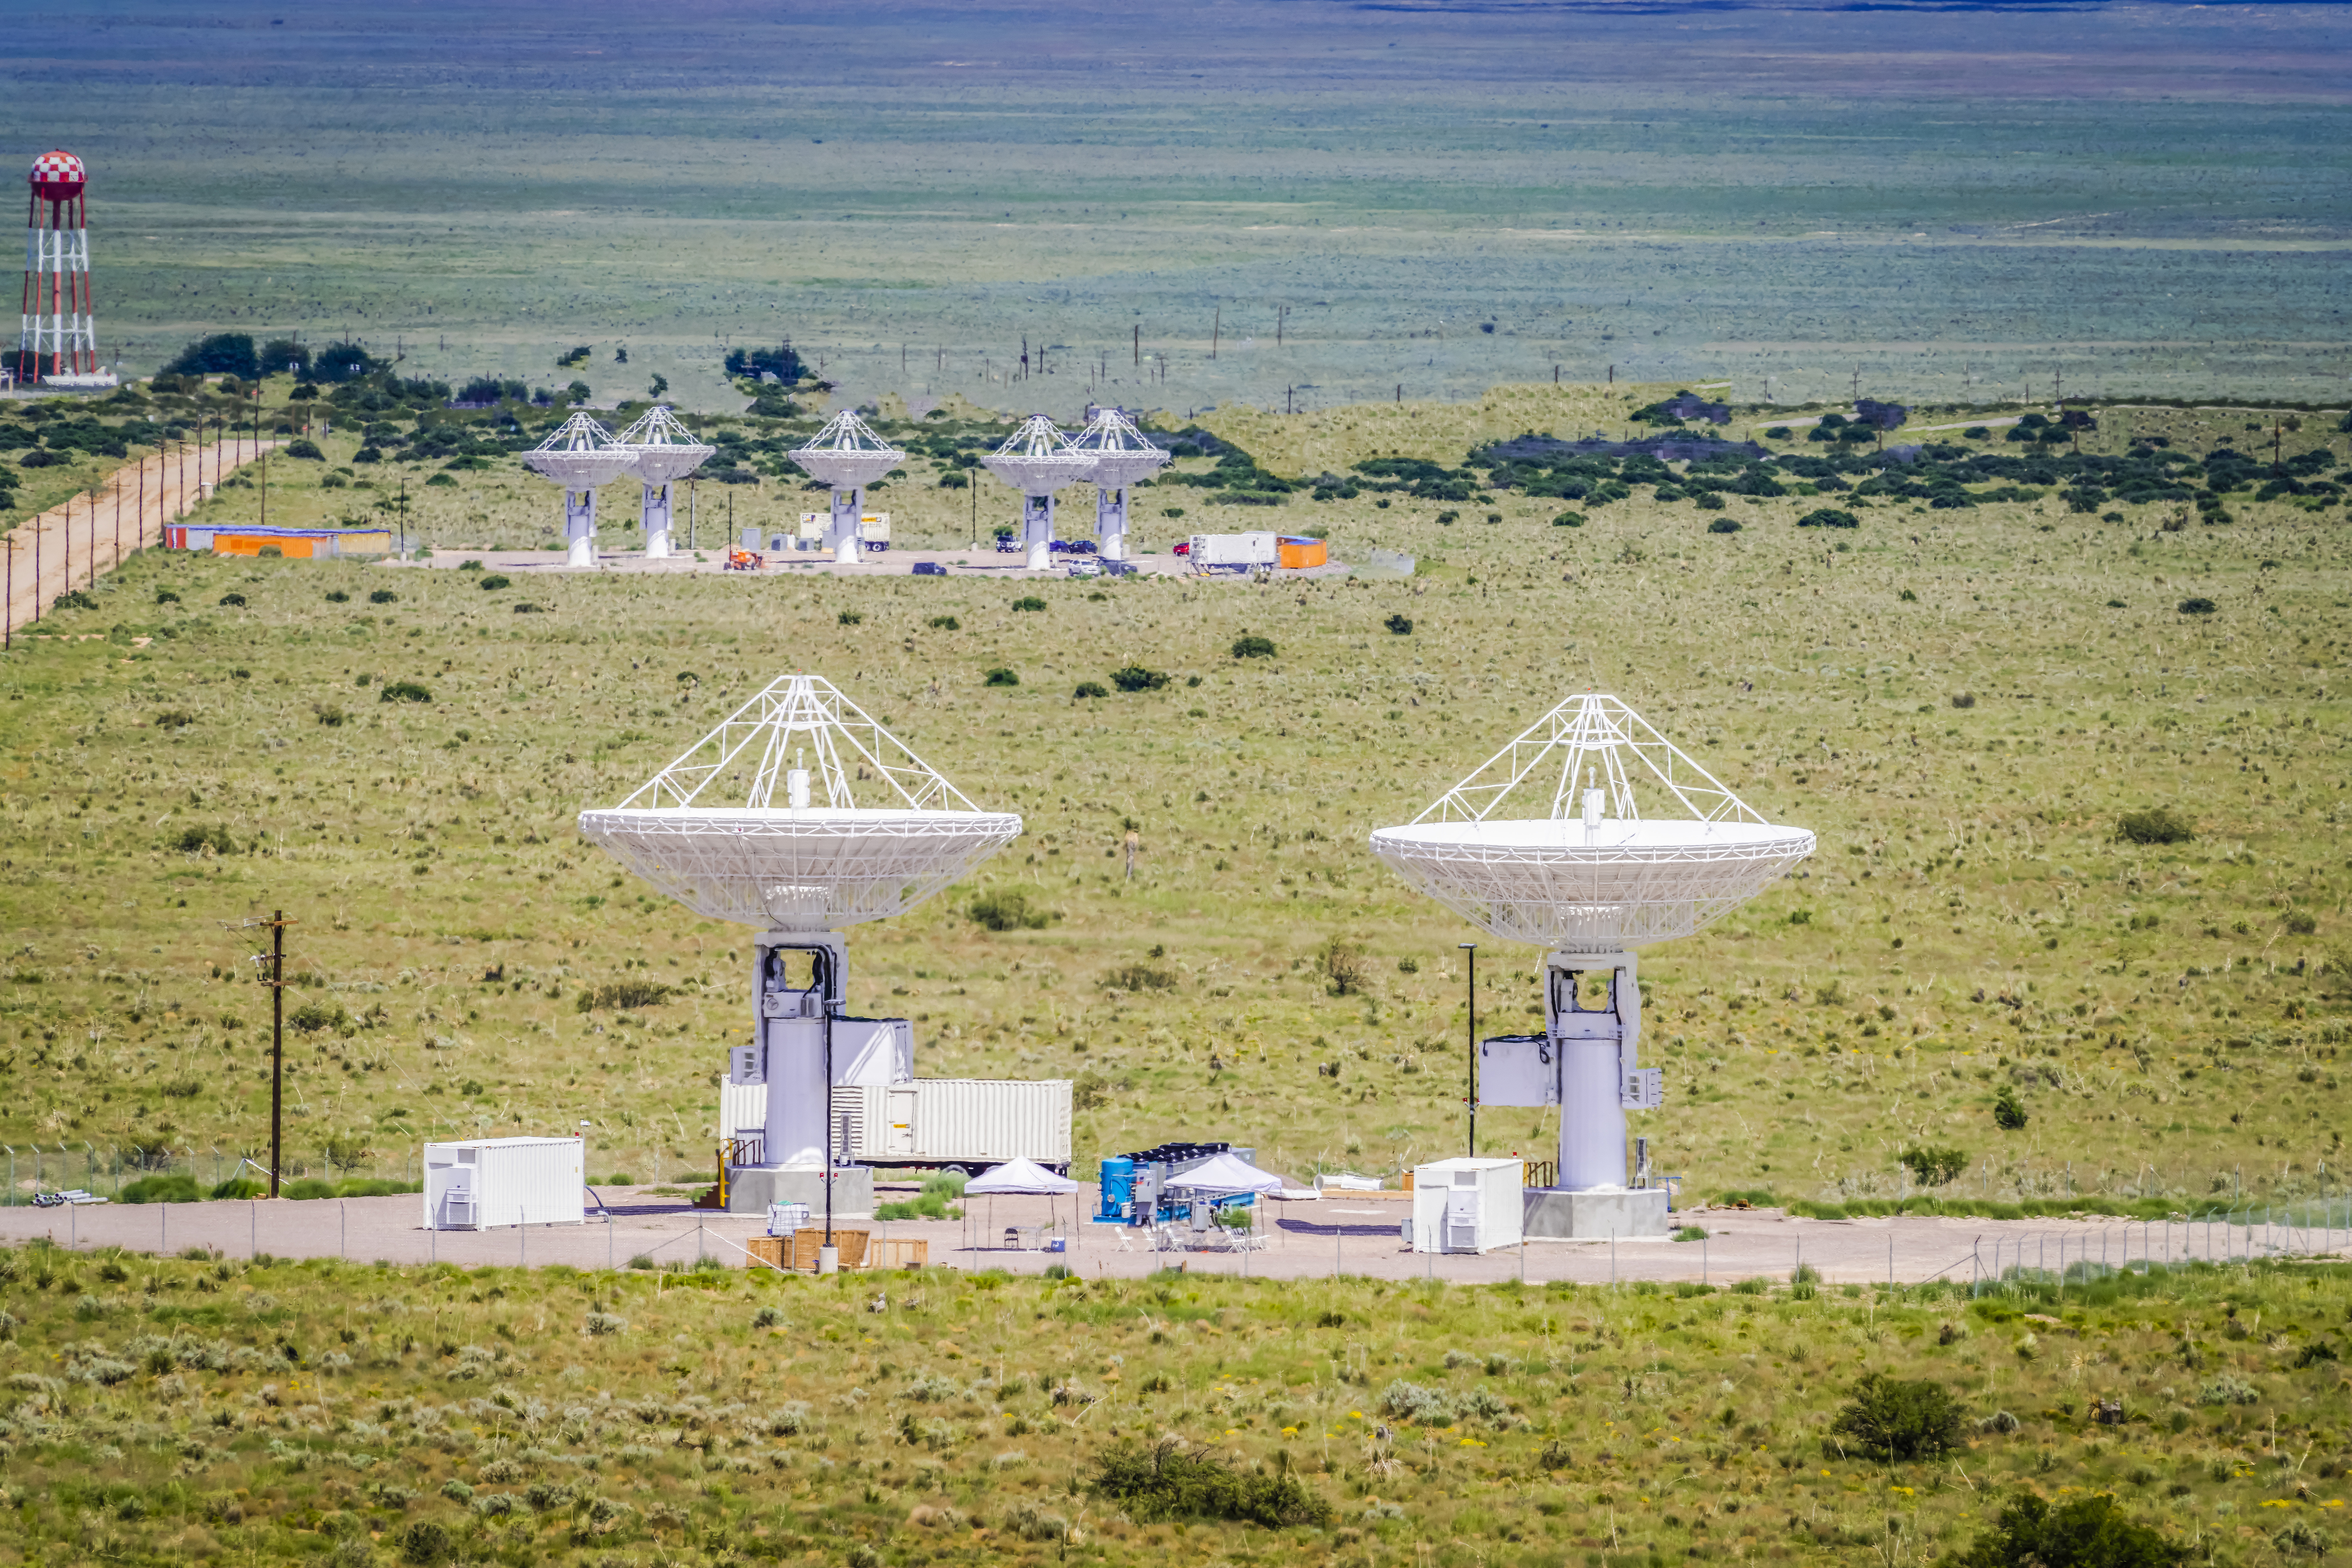 The operational Deep Space Advanced Radar Concept (DARC) at White Sands Missile Range, New Mexico